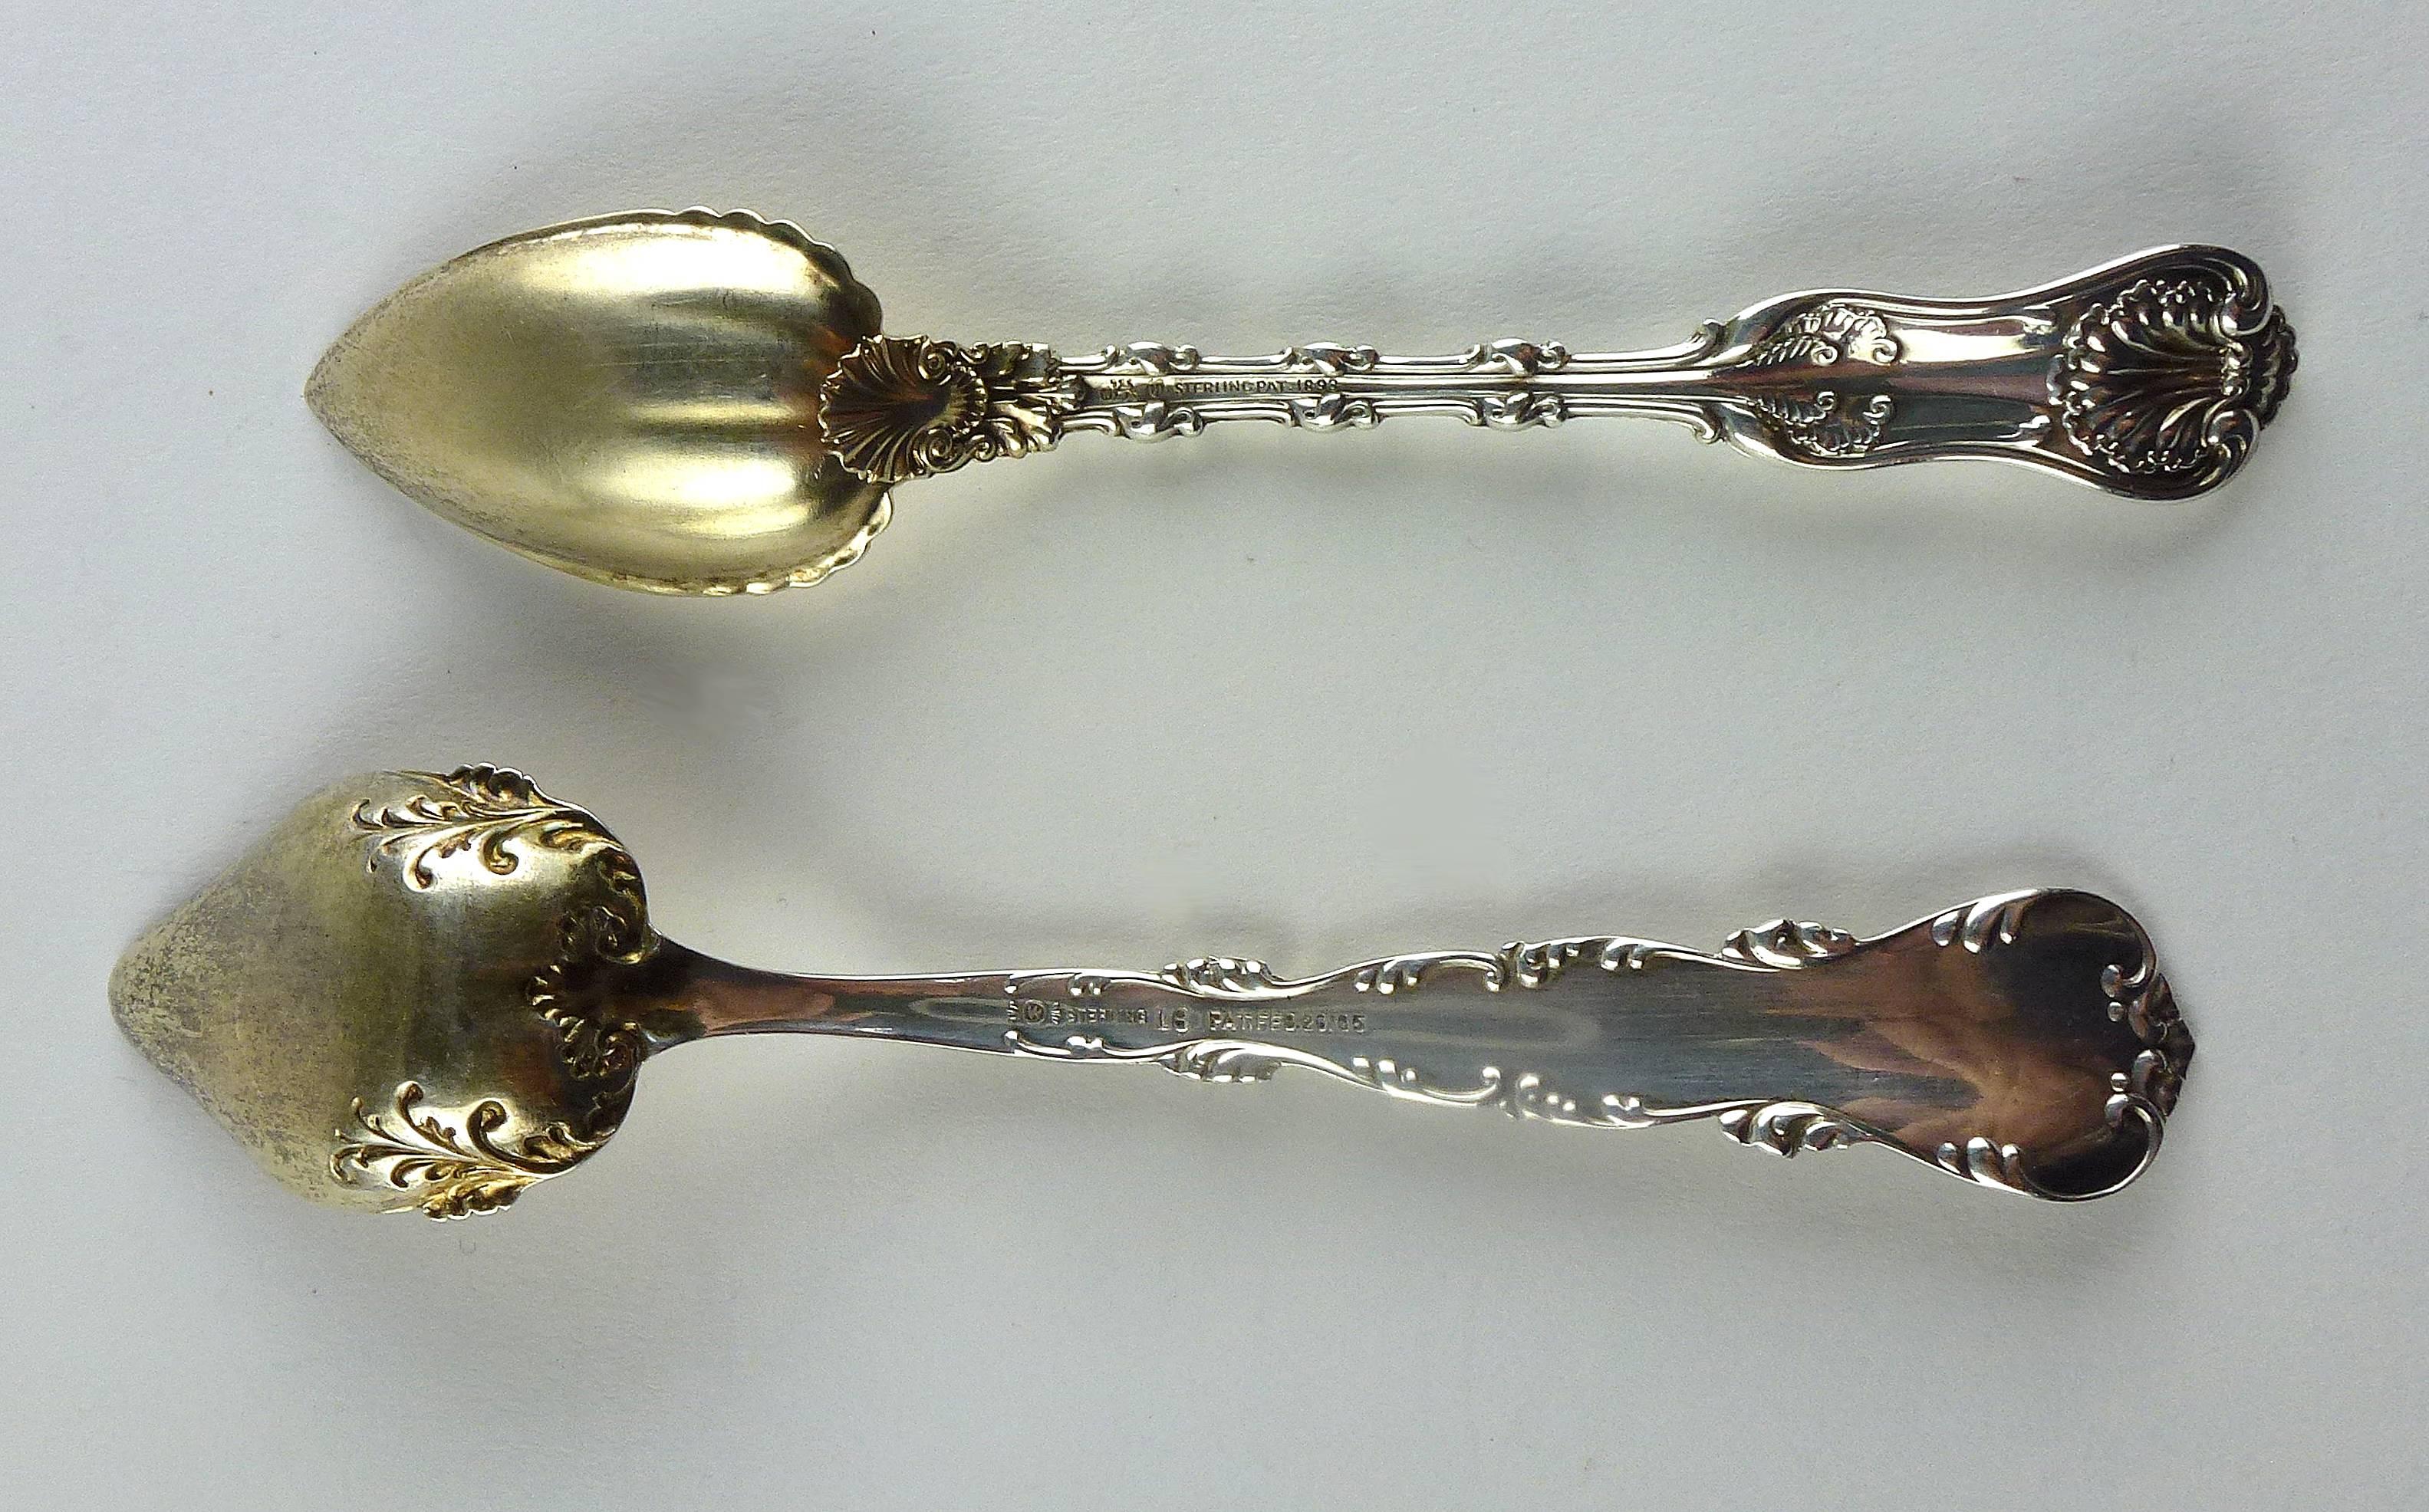 American Harlequin Set of Six Sterling and Gold-Wash Grapefruit Spoons by Whiting